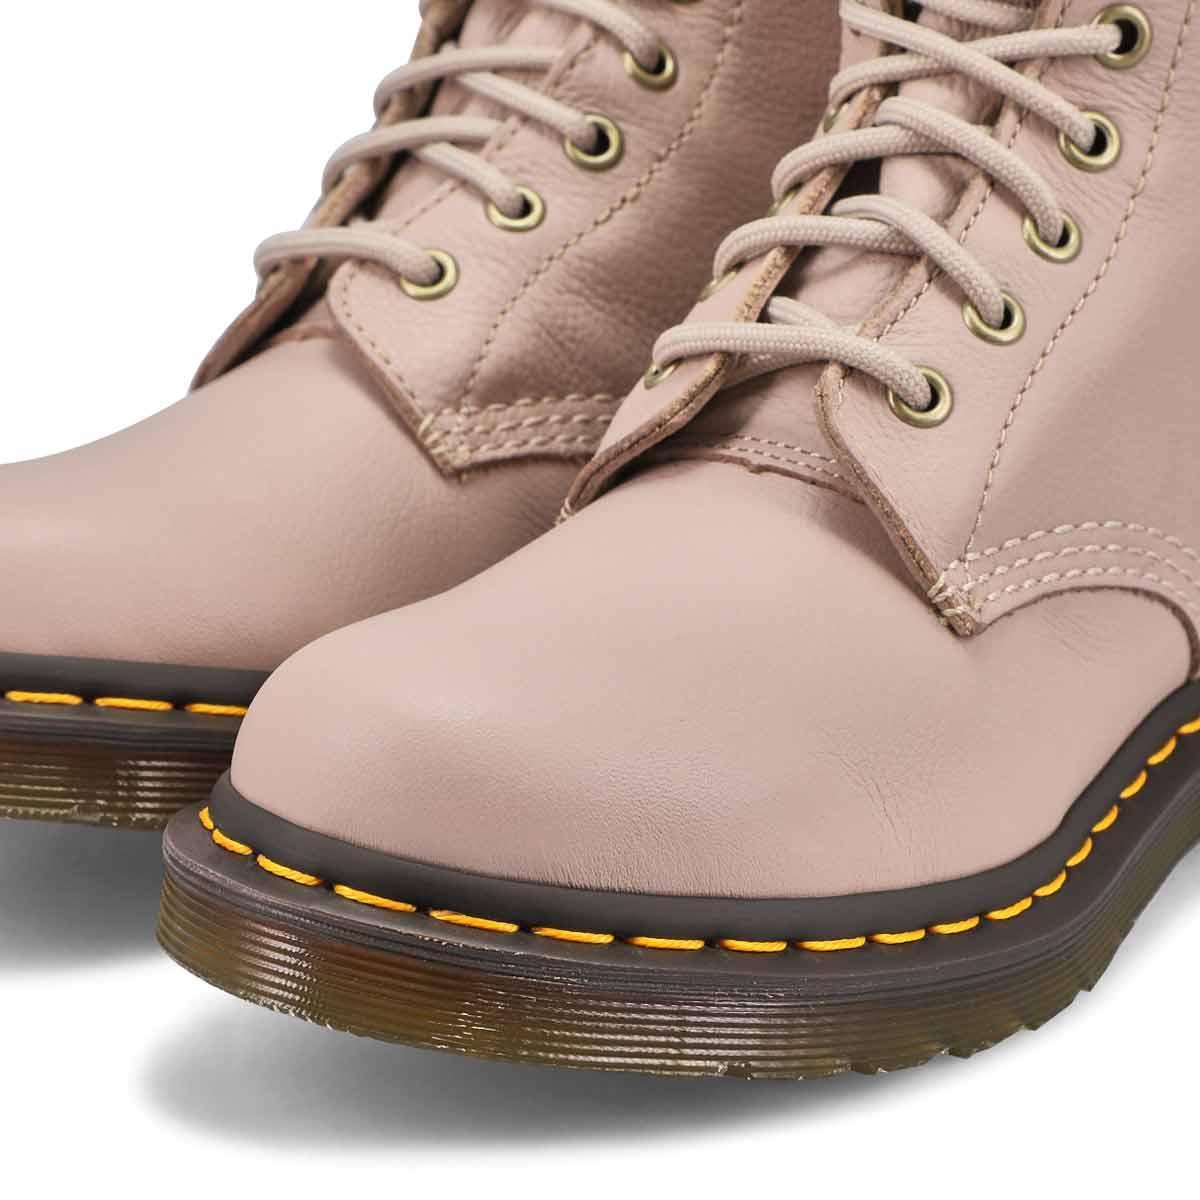 Women's 1460 Pascal 8-Eye Combat Boot - Vintage Taupe